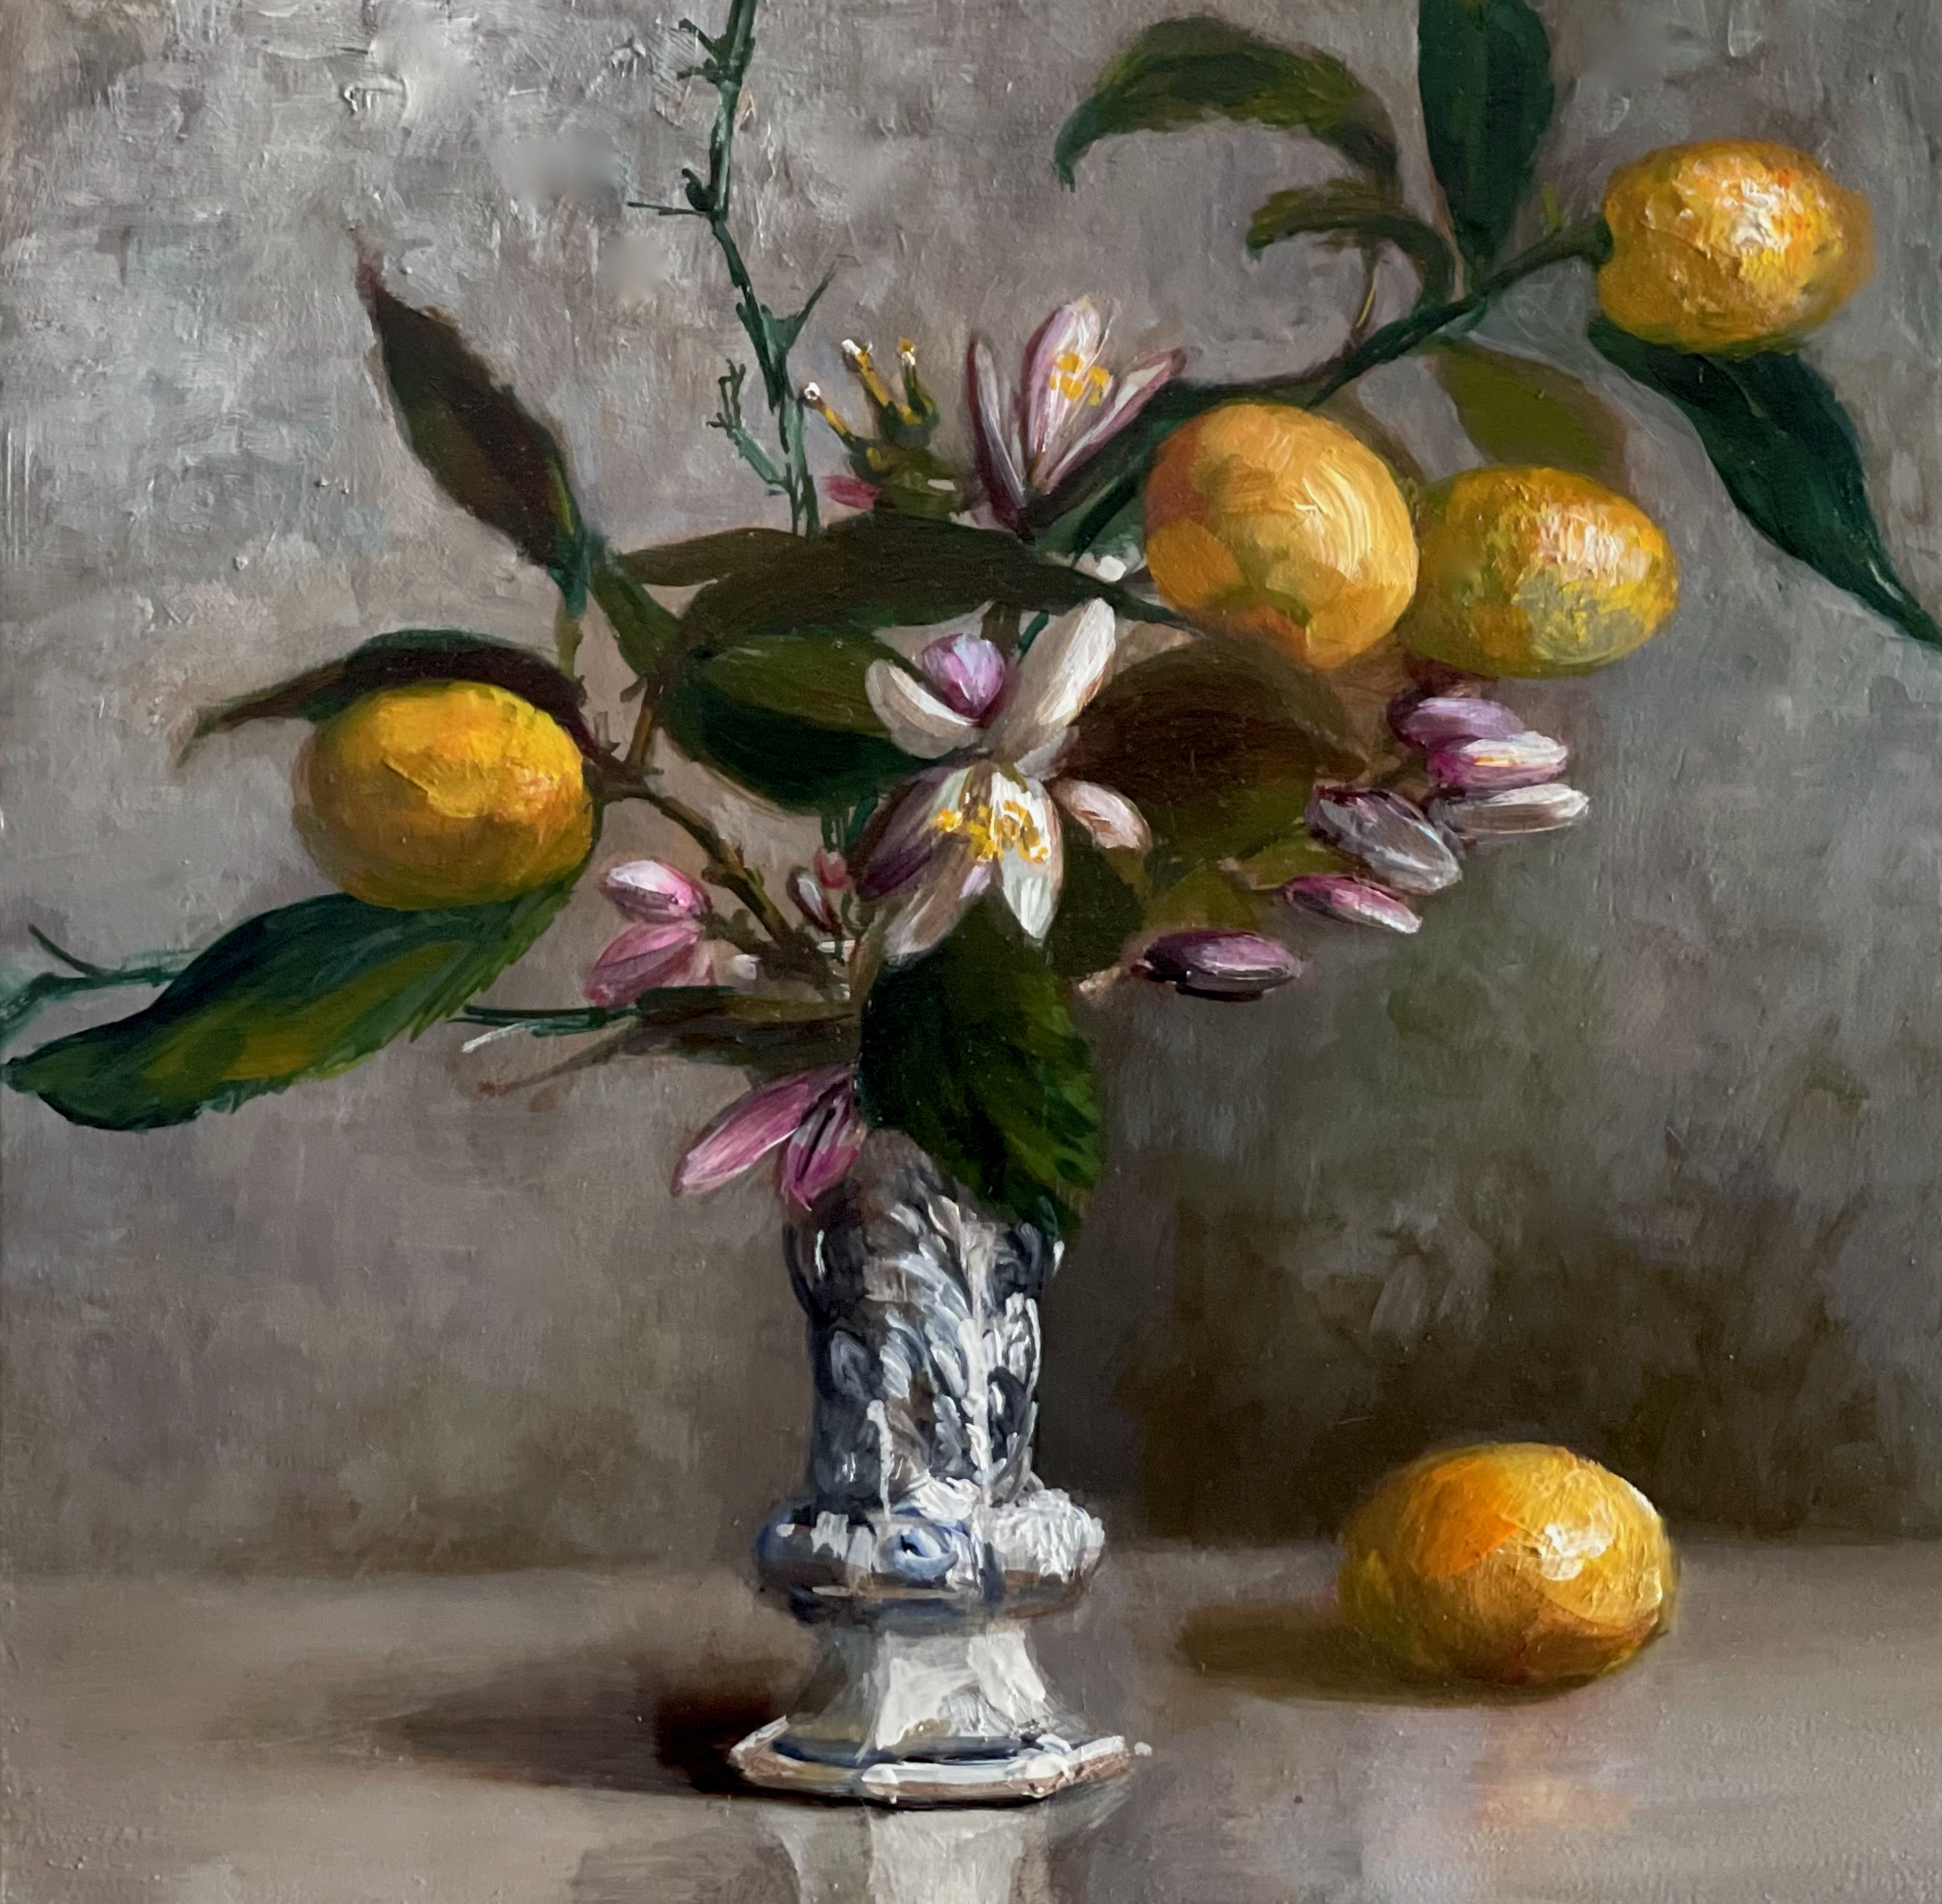 You are currently viewing Waiting Through Winter (Kumquats with Meyer Lemon Blossoms in Antique Delft)